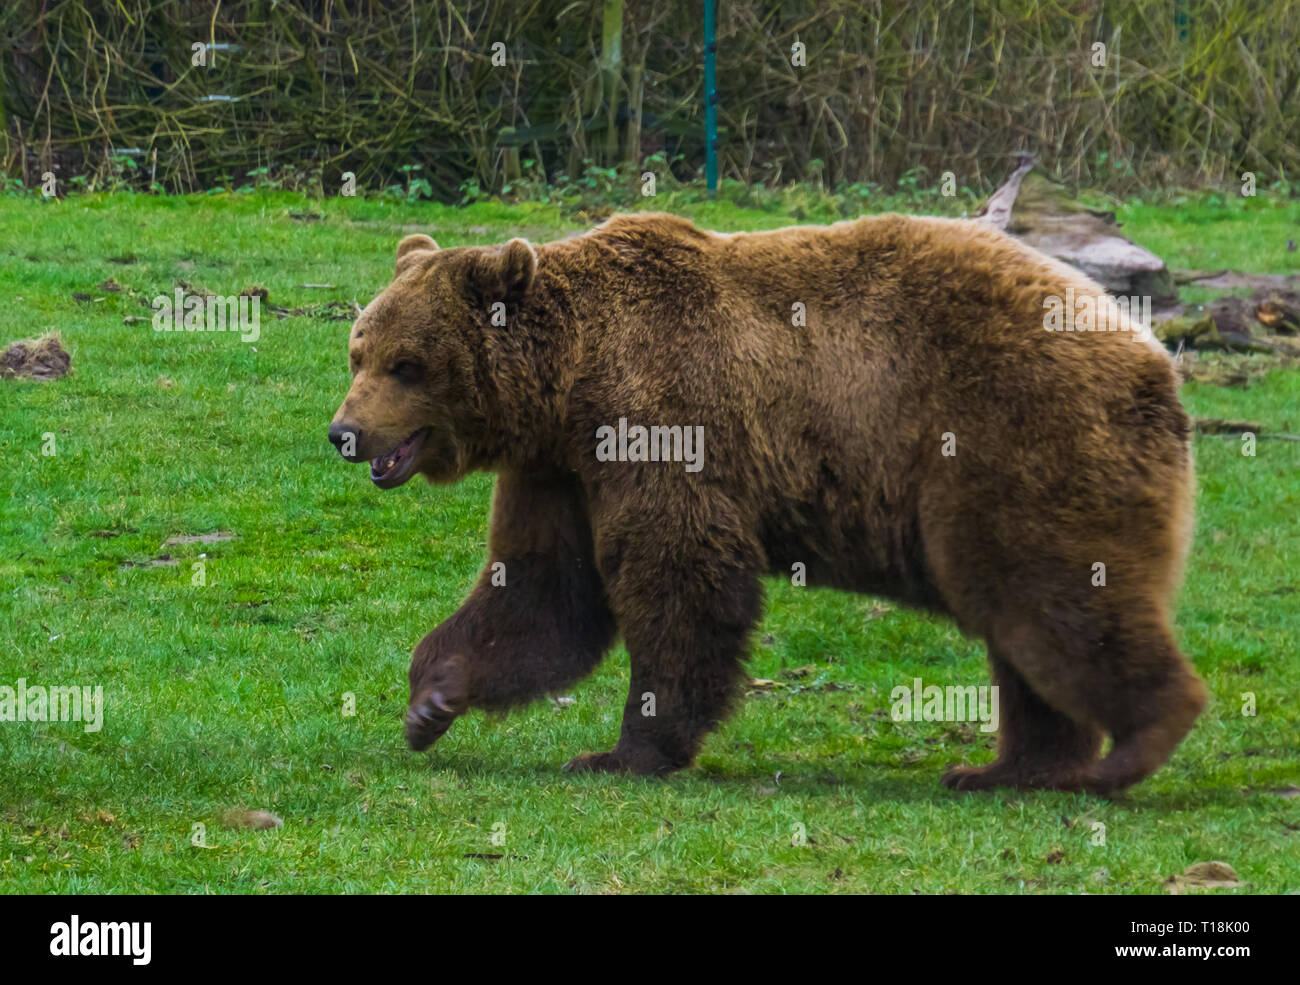 Brown bear walking through the grass, common animal in Eurasia and north  America, popular zoo animals Stock Photo - Alamy